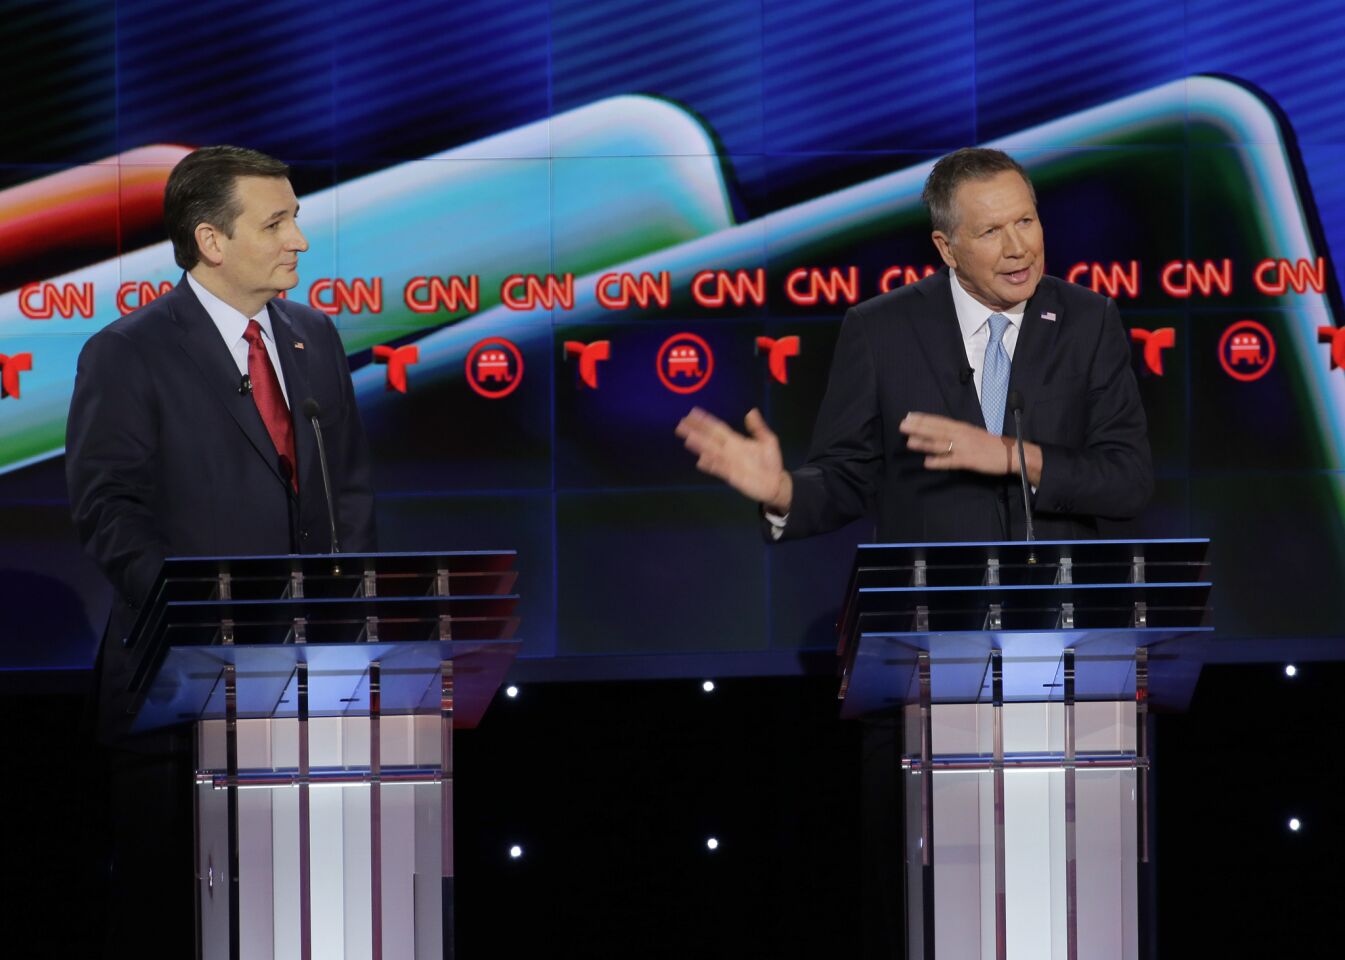 GOP candidate John Kasich, right, speaks as rival Ted Cruz looks on.